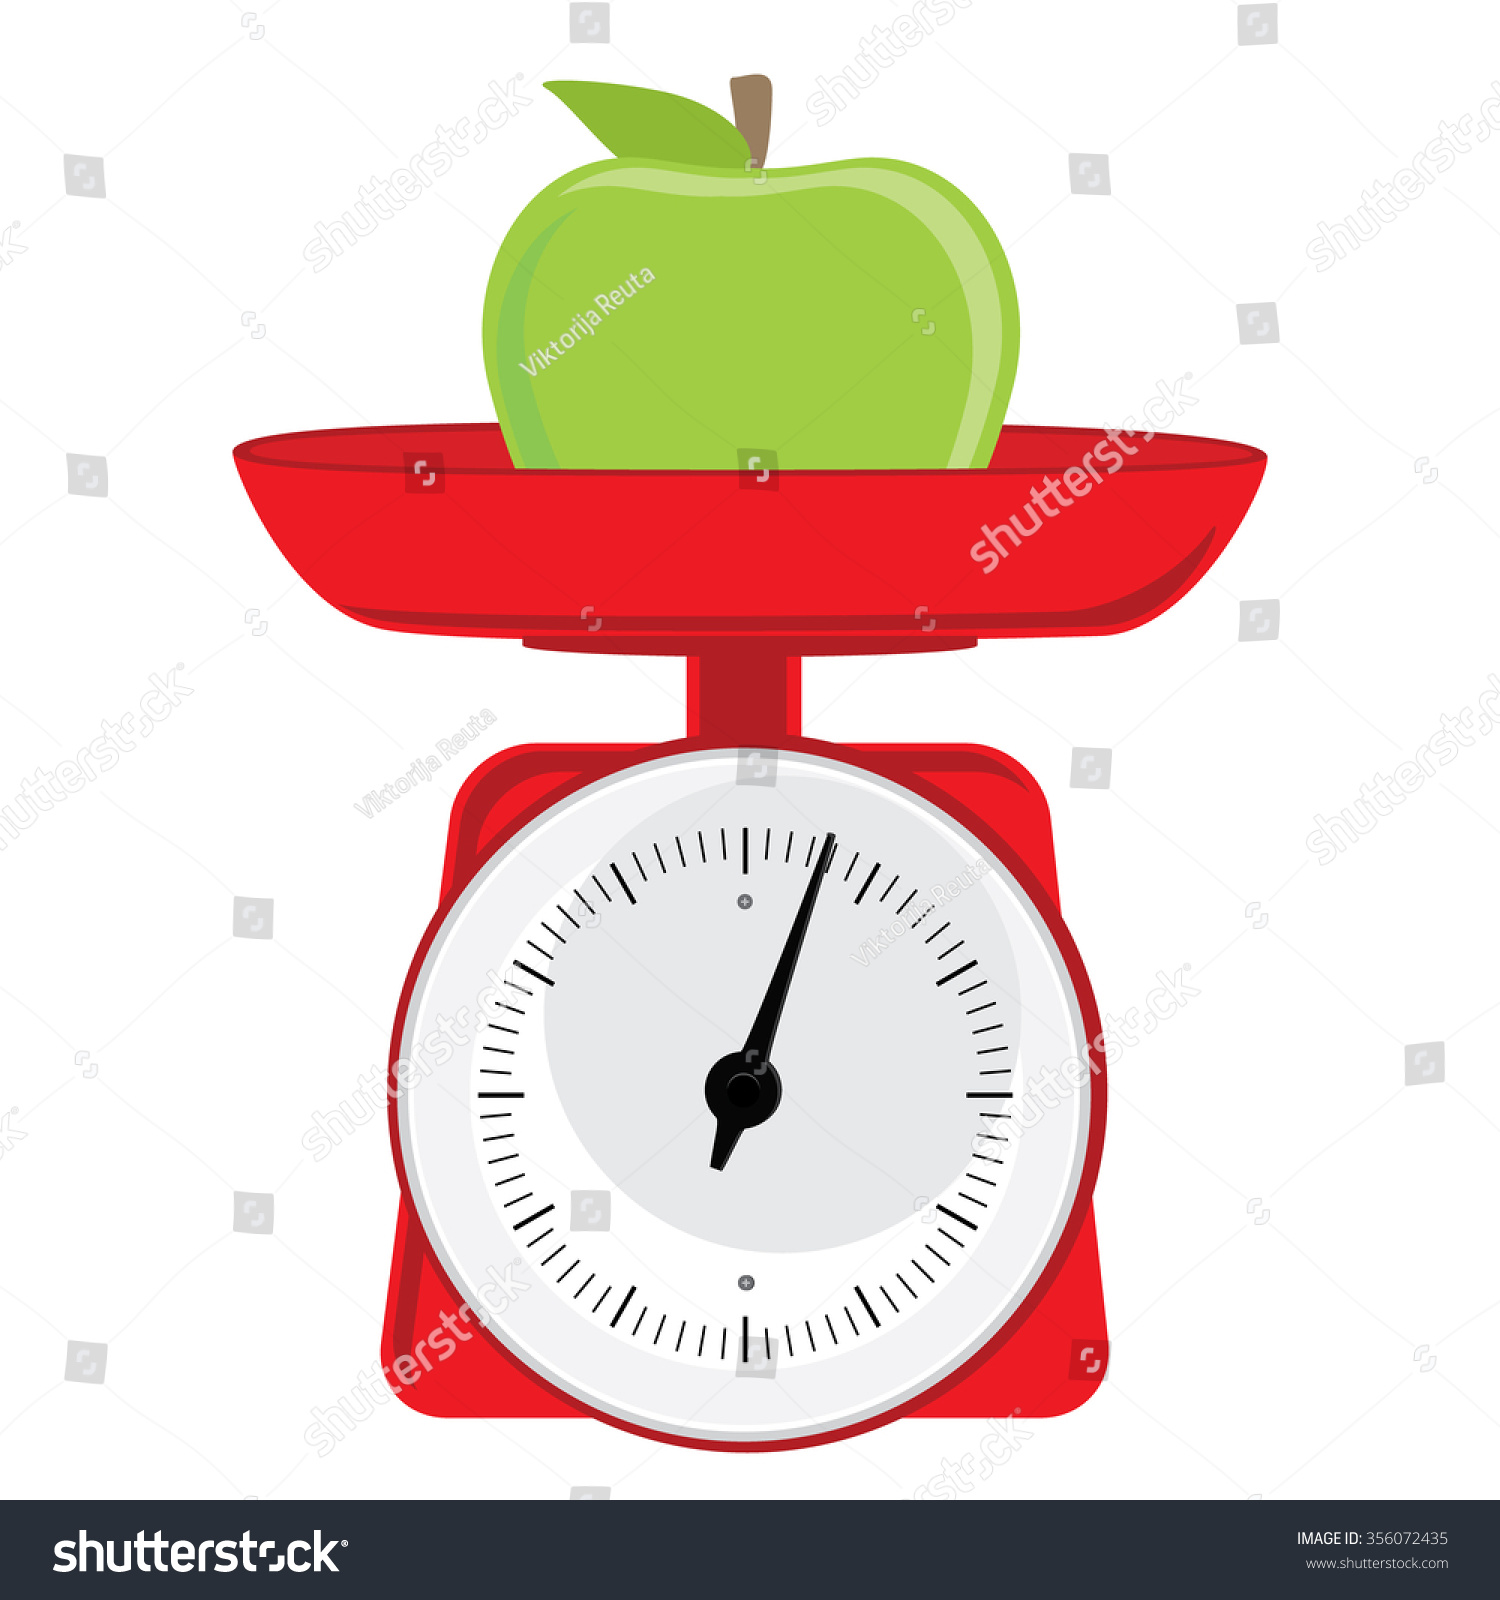 Weighing an apple photo